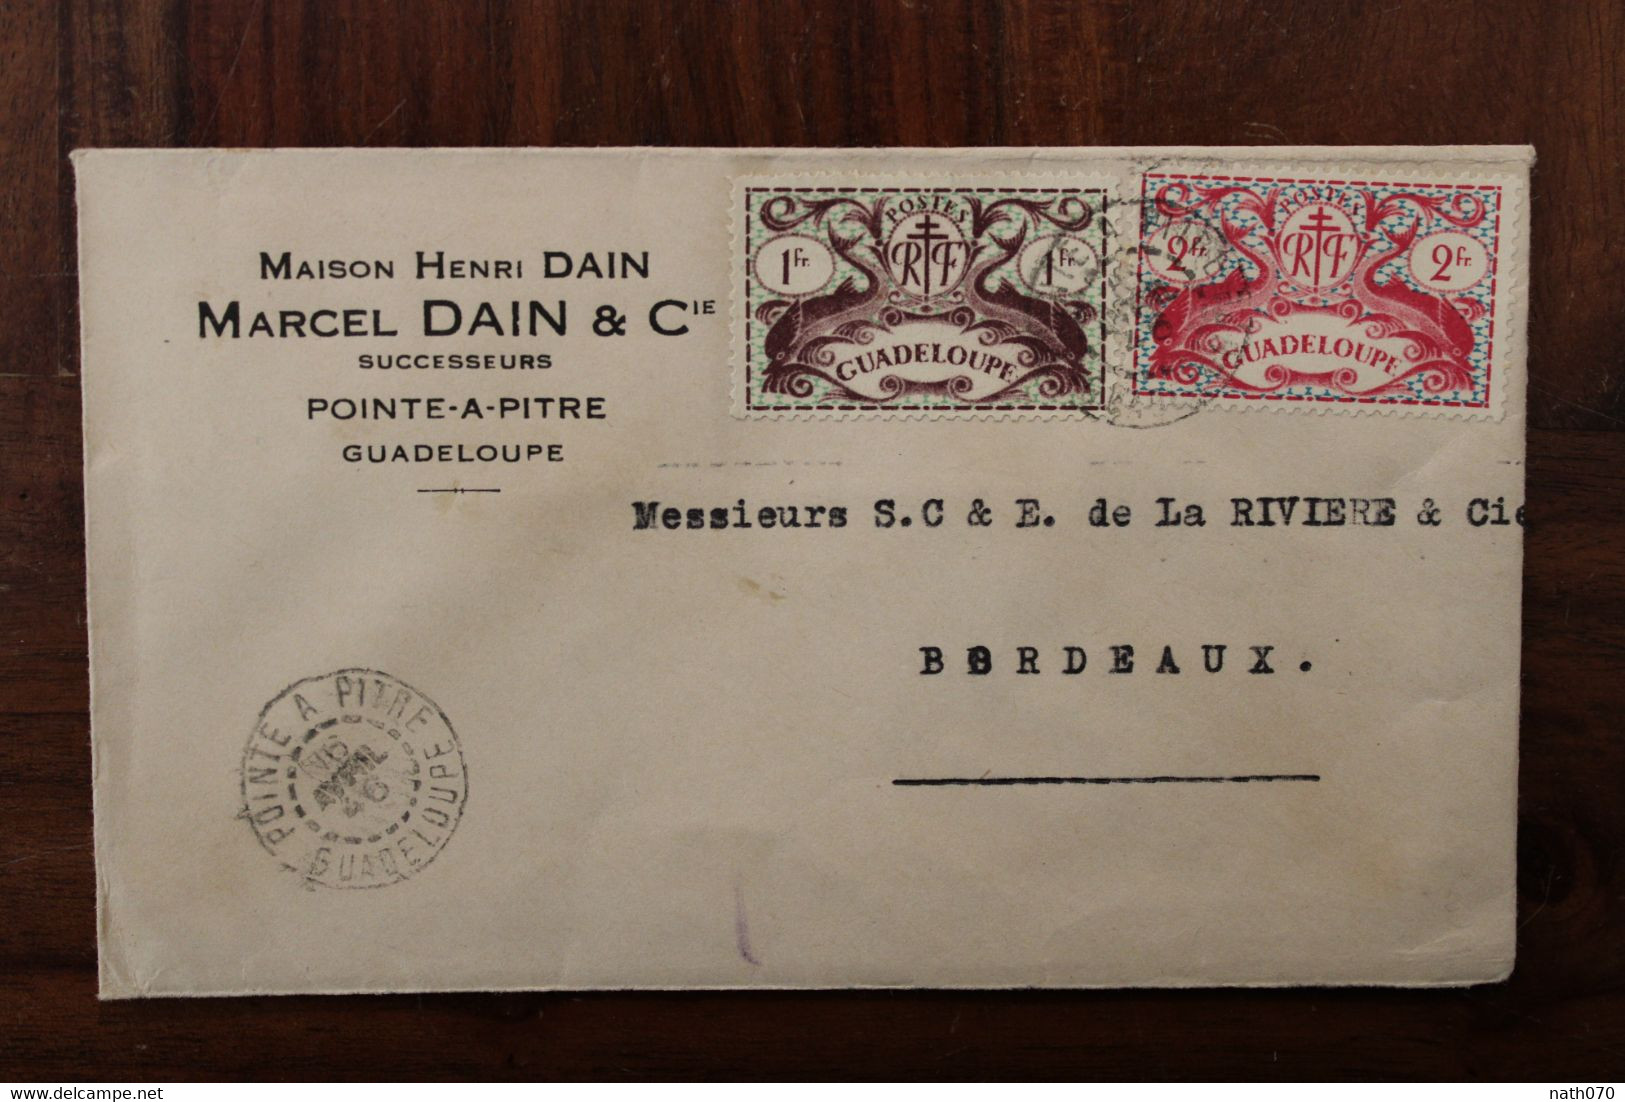 Guadeloupe 1946 France Cover Mail - Covers & Documents